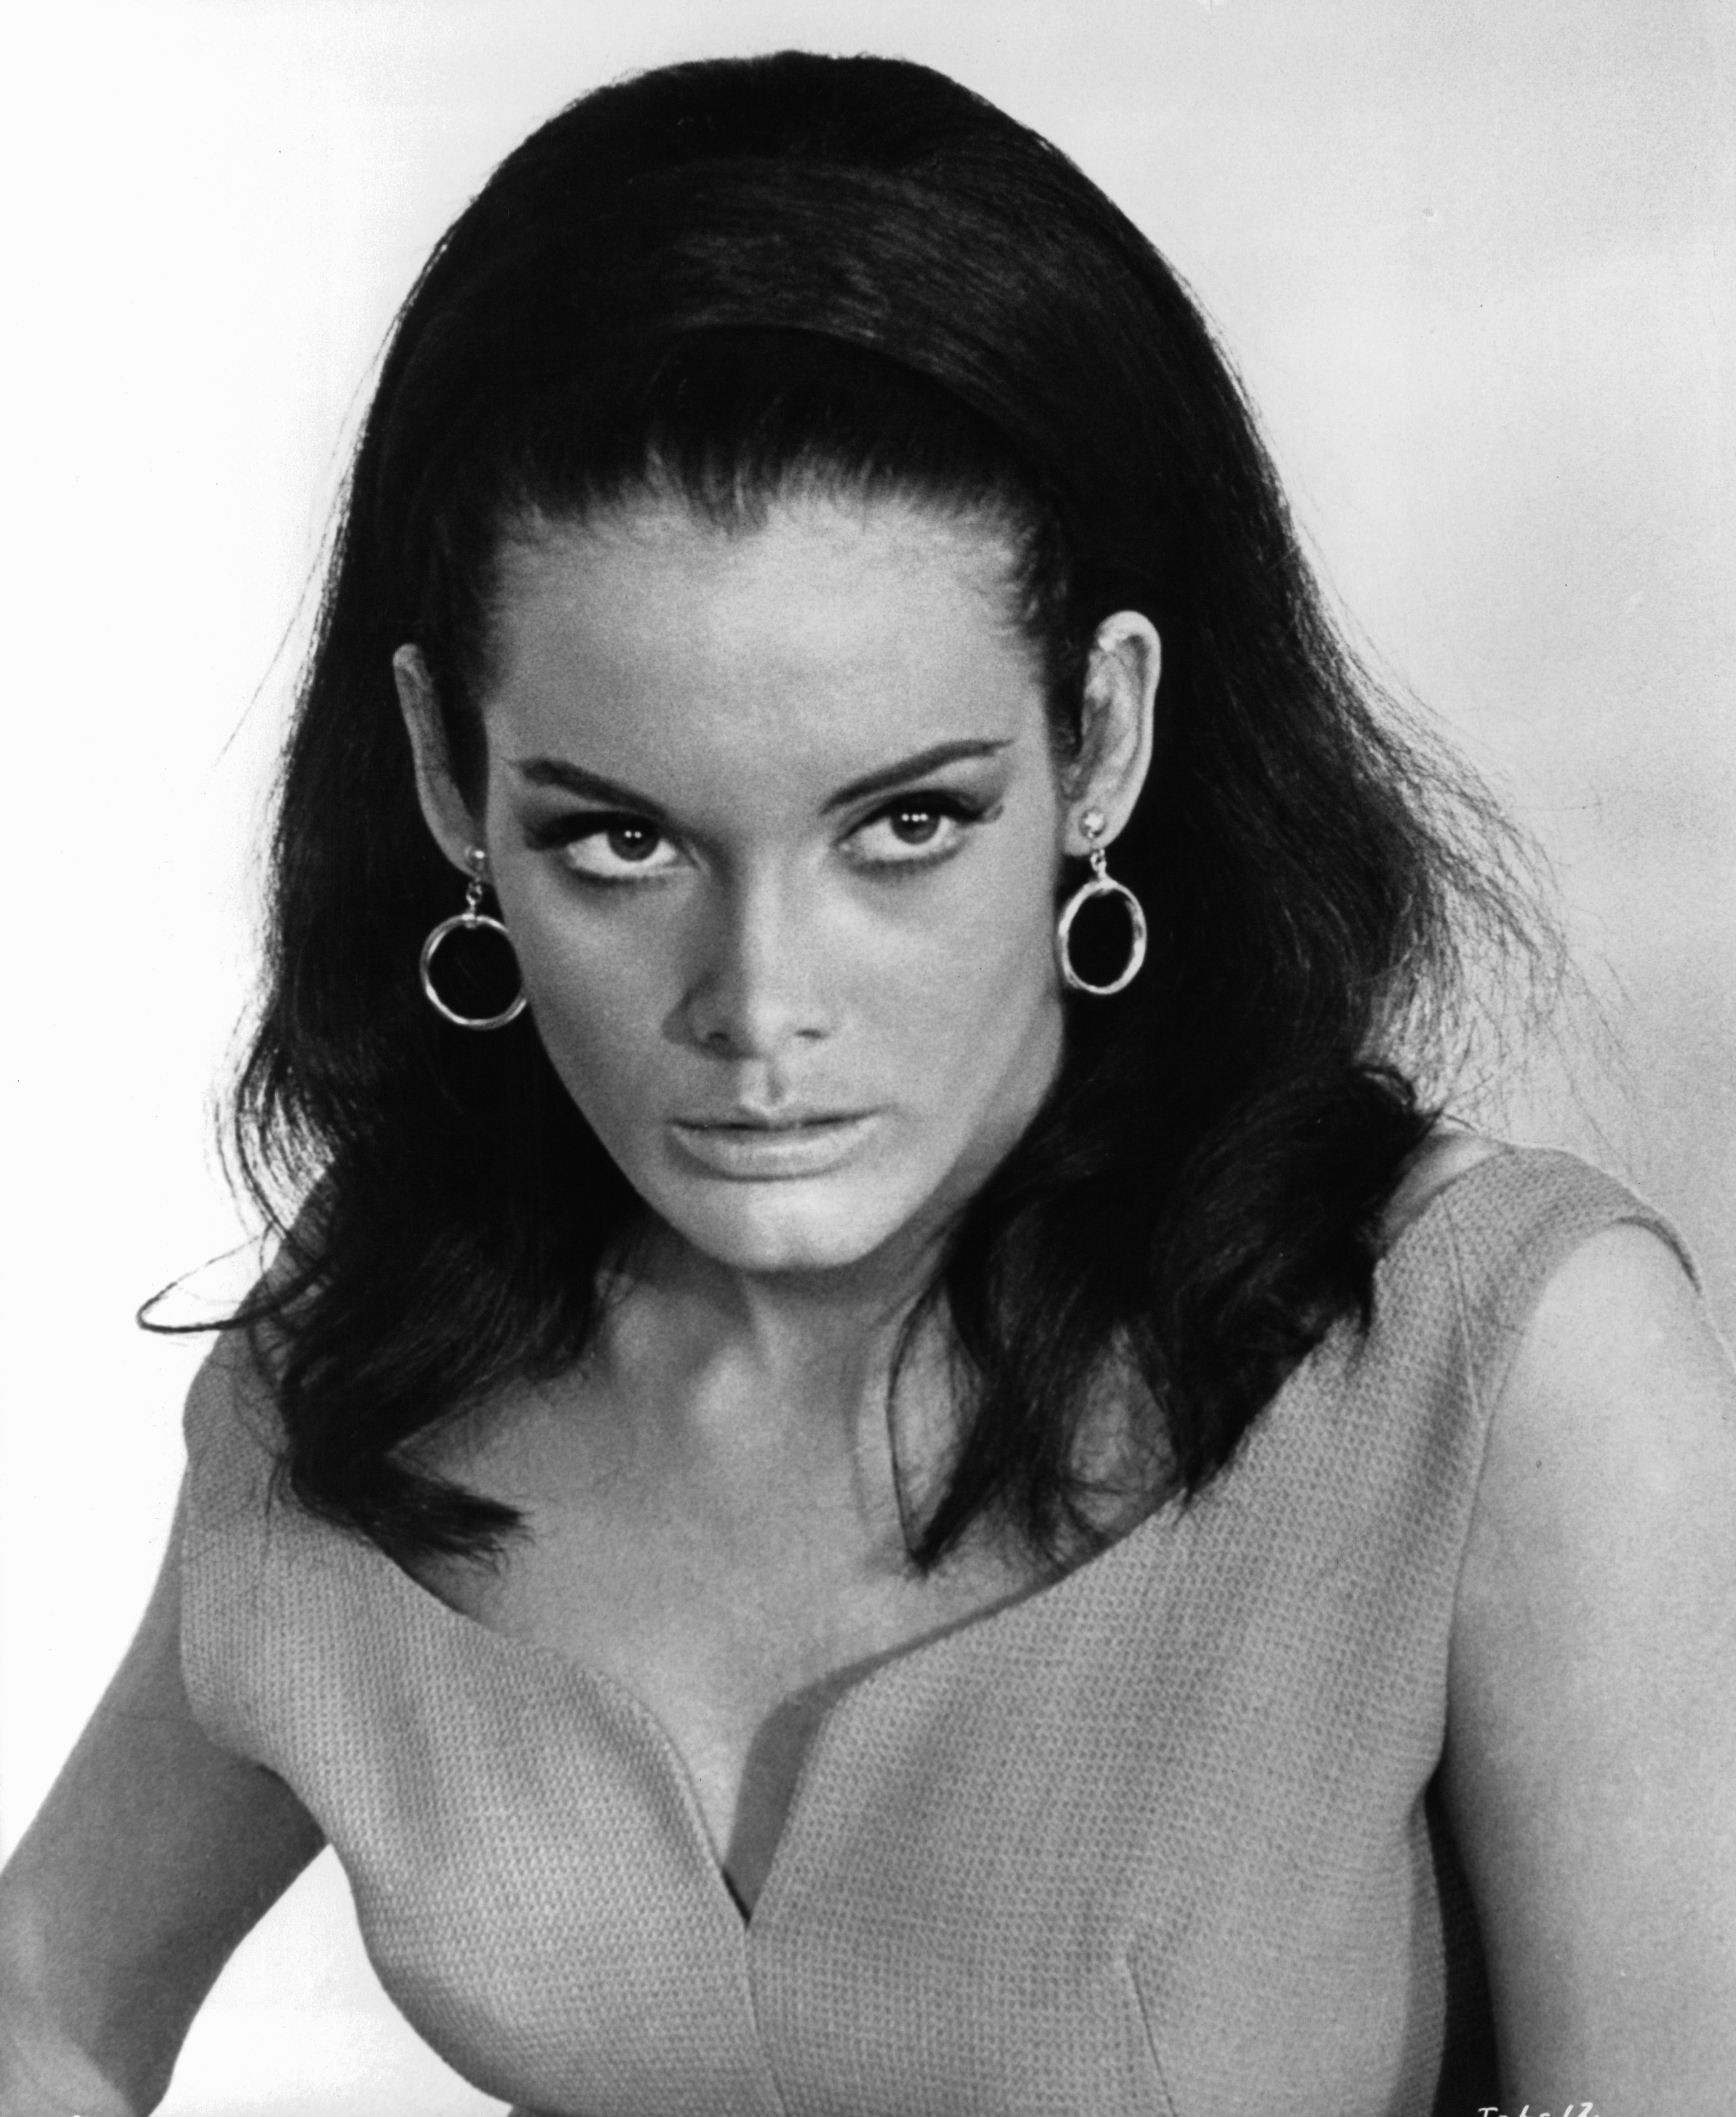 Martine Beswick in a scene from the film "Thunderball" in 1965. | Source: Getty Images